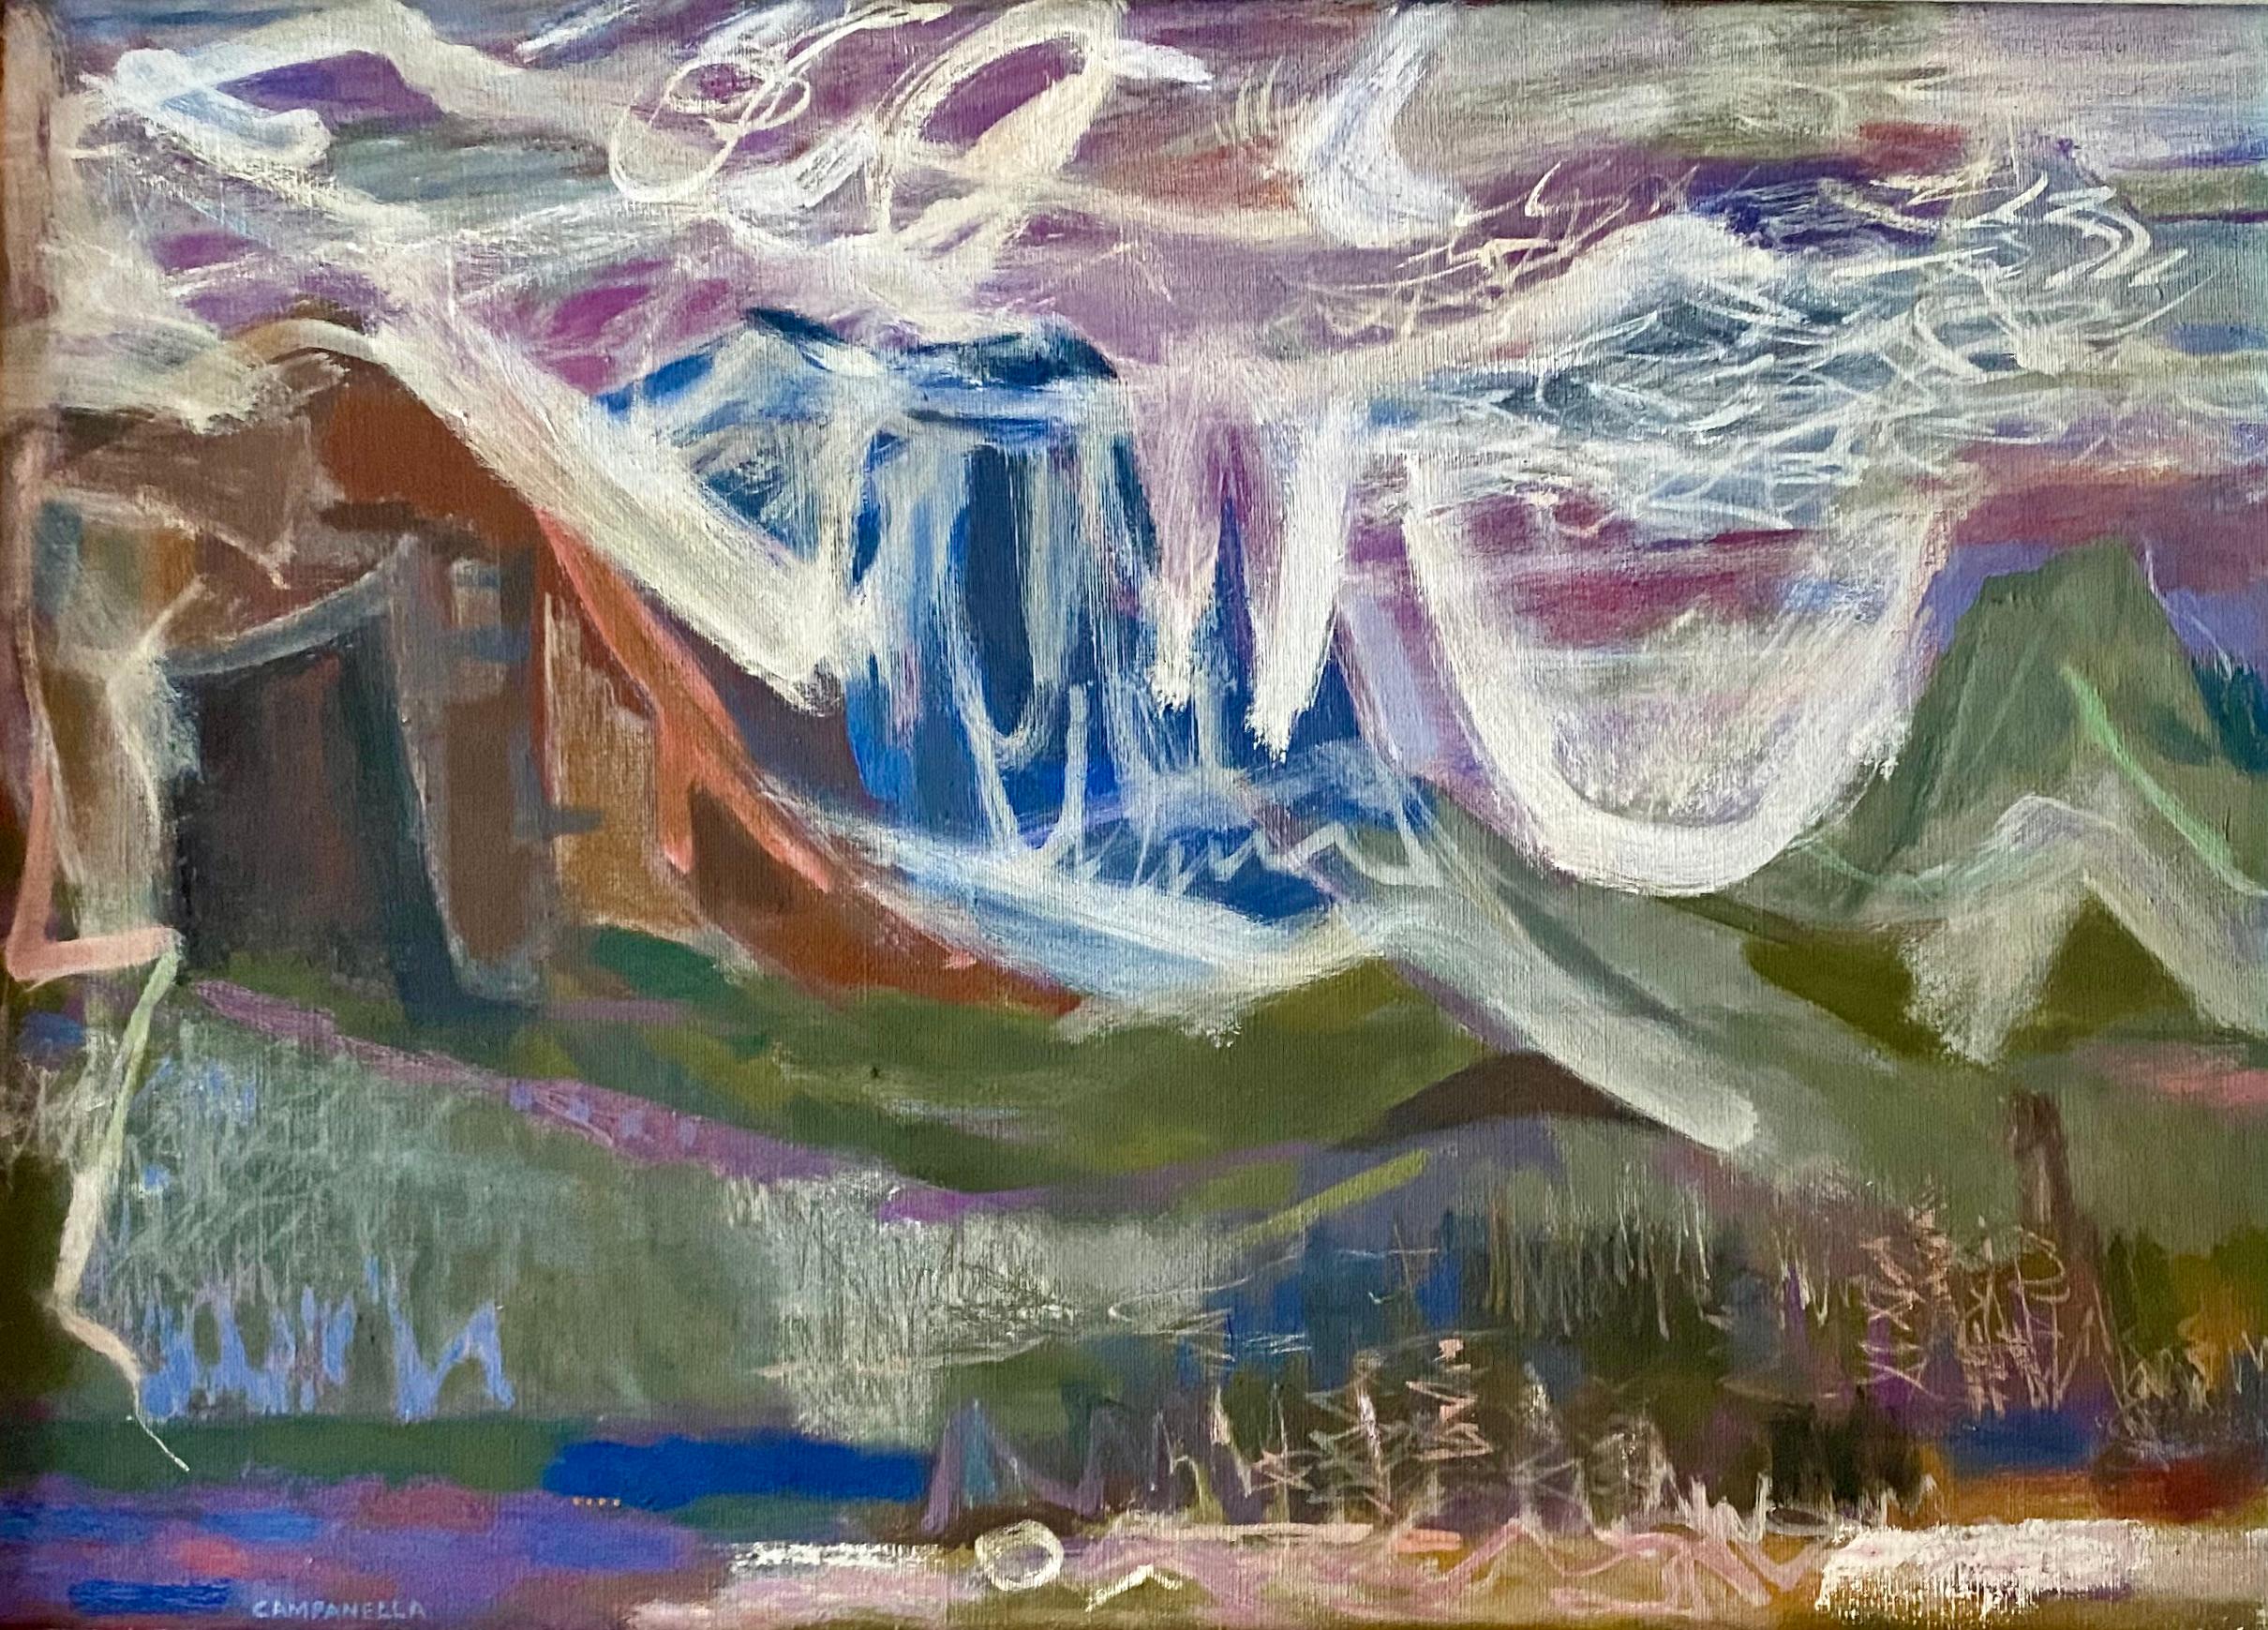 Vincent Campanella Landscape Painting - GLACIER PARK 1940s WPA Mid-Century Realism to Abstraction American Modernism